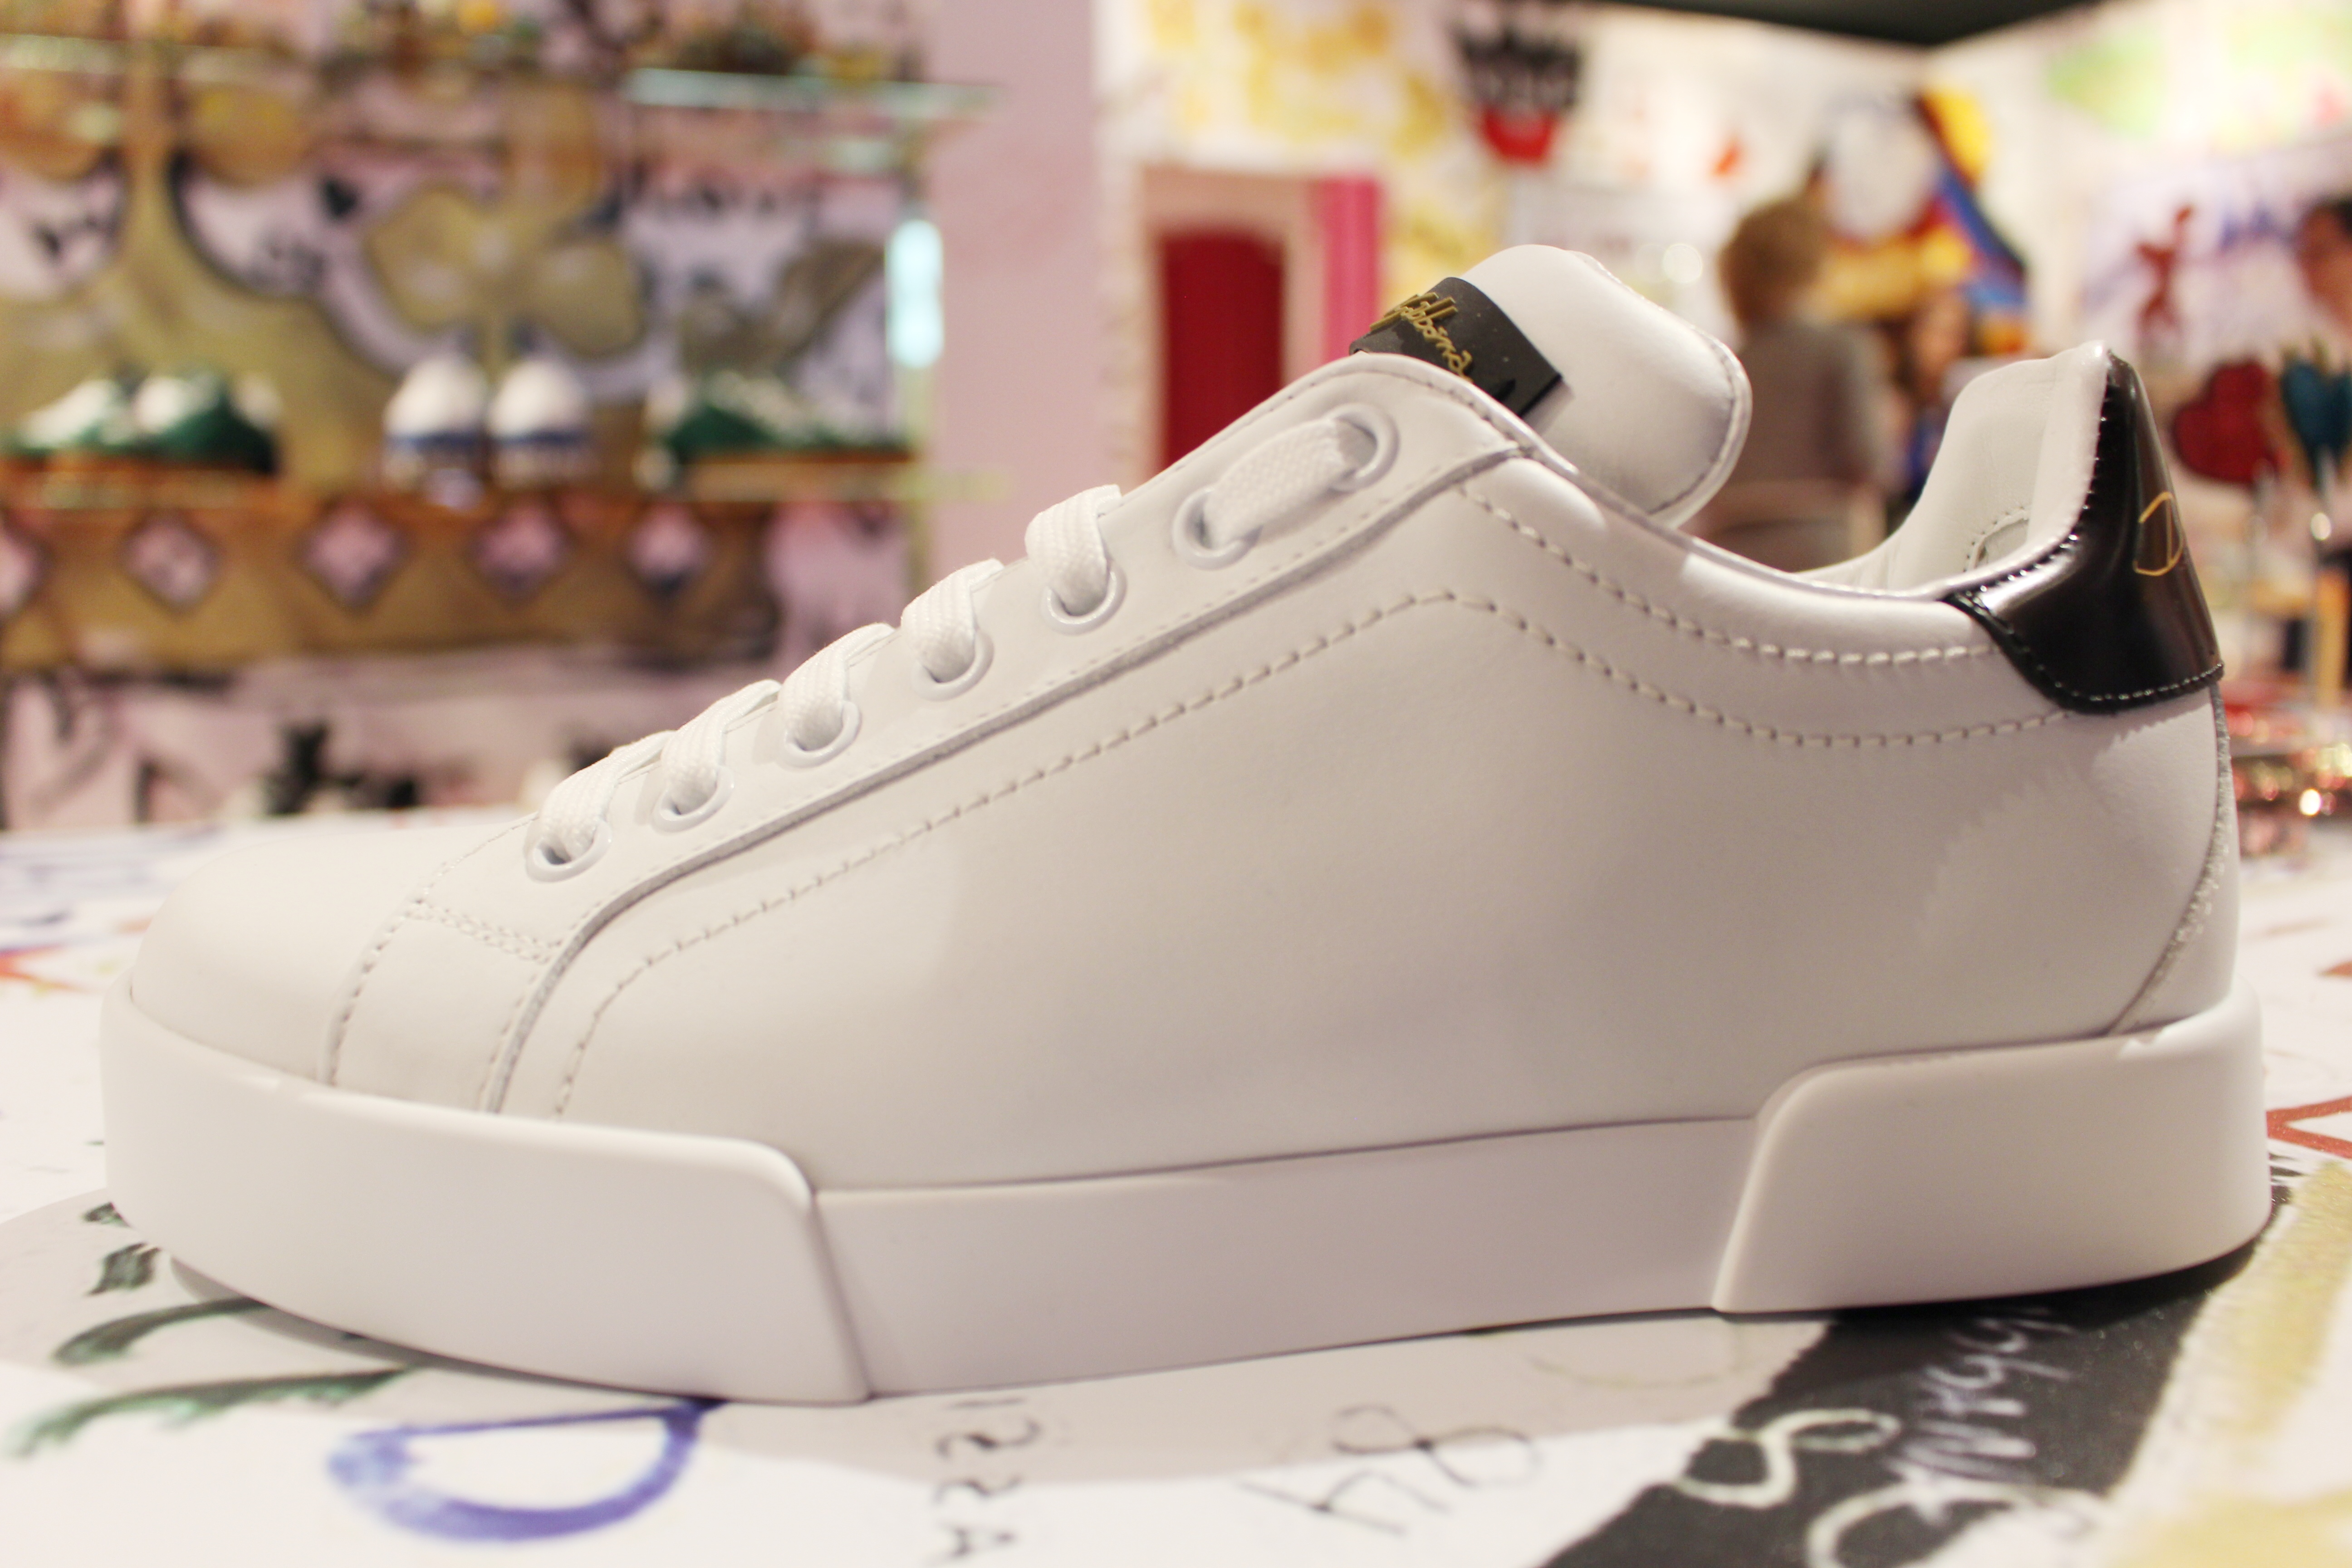 dolce and gabbana customize sneakers